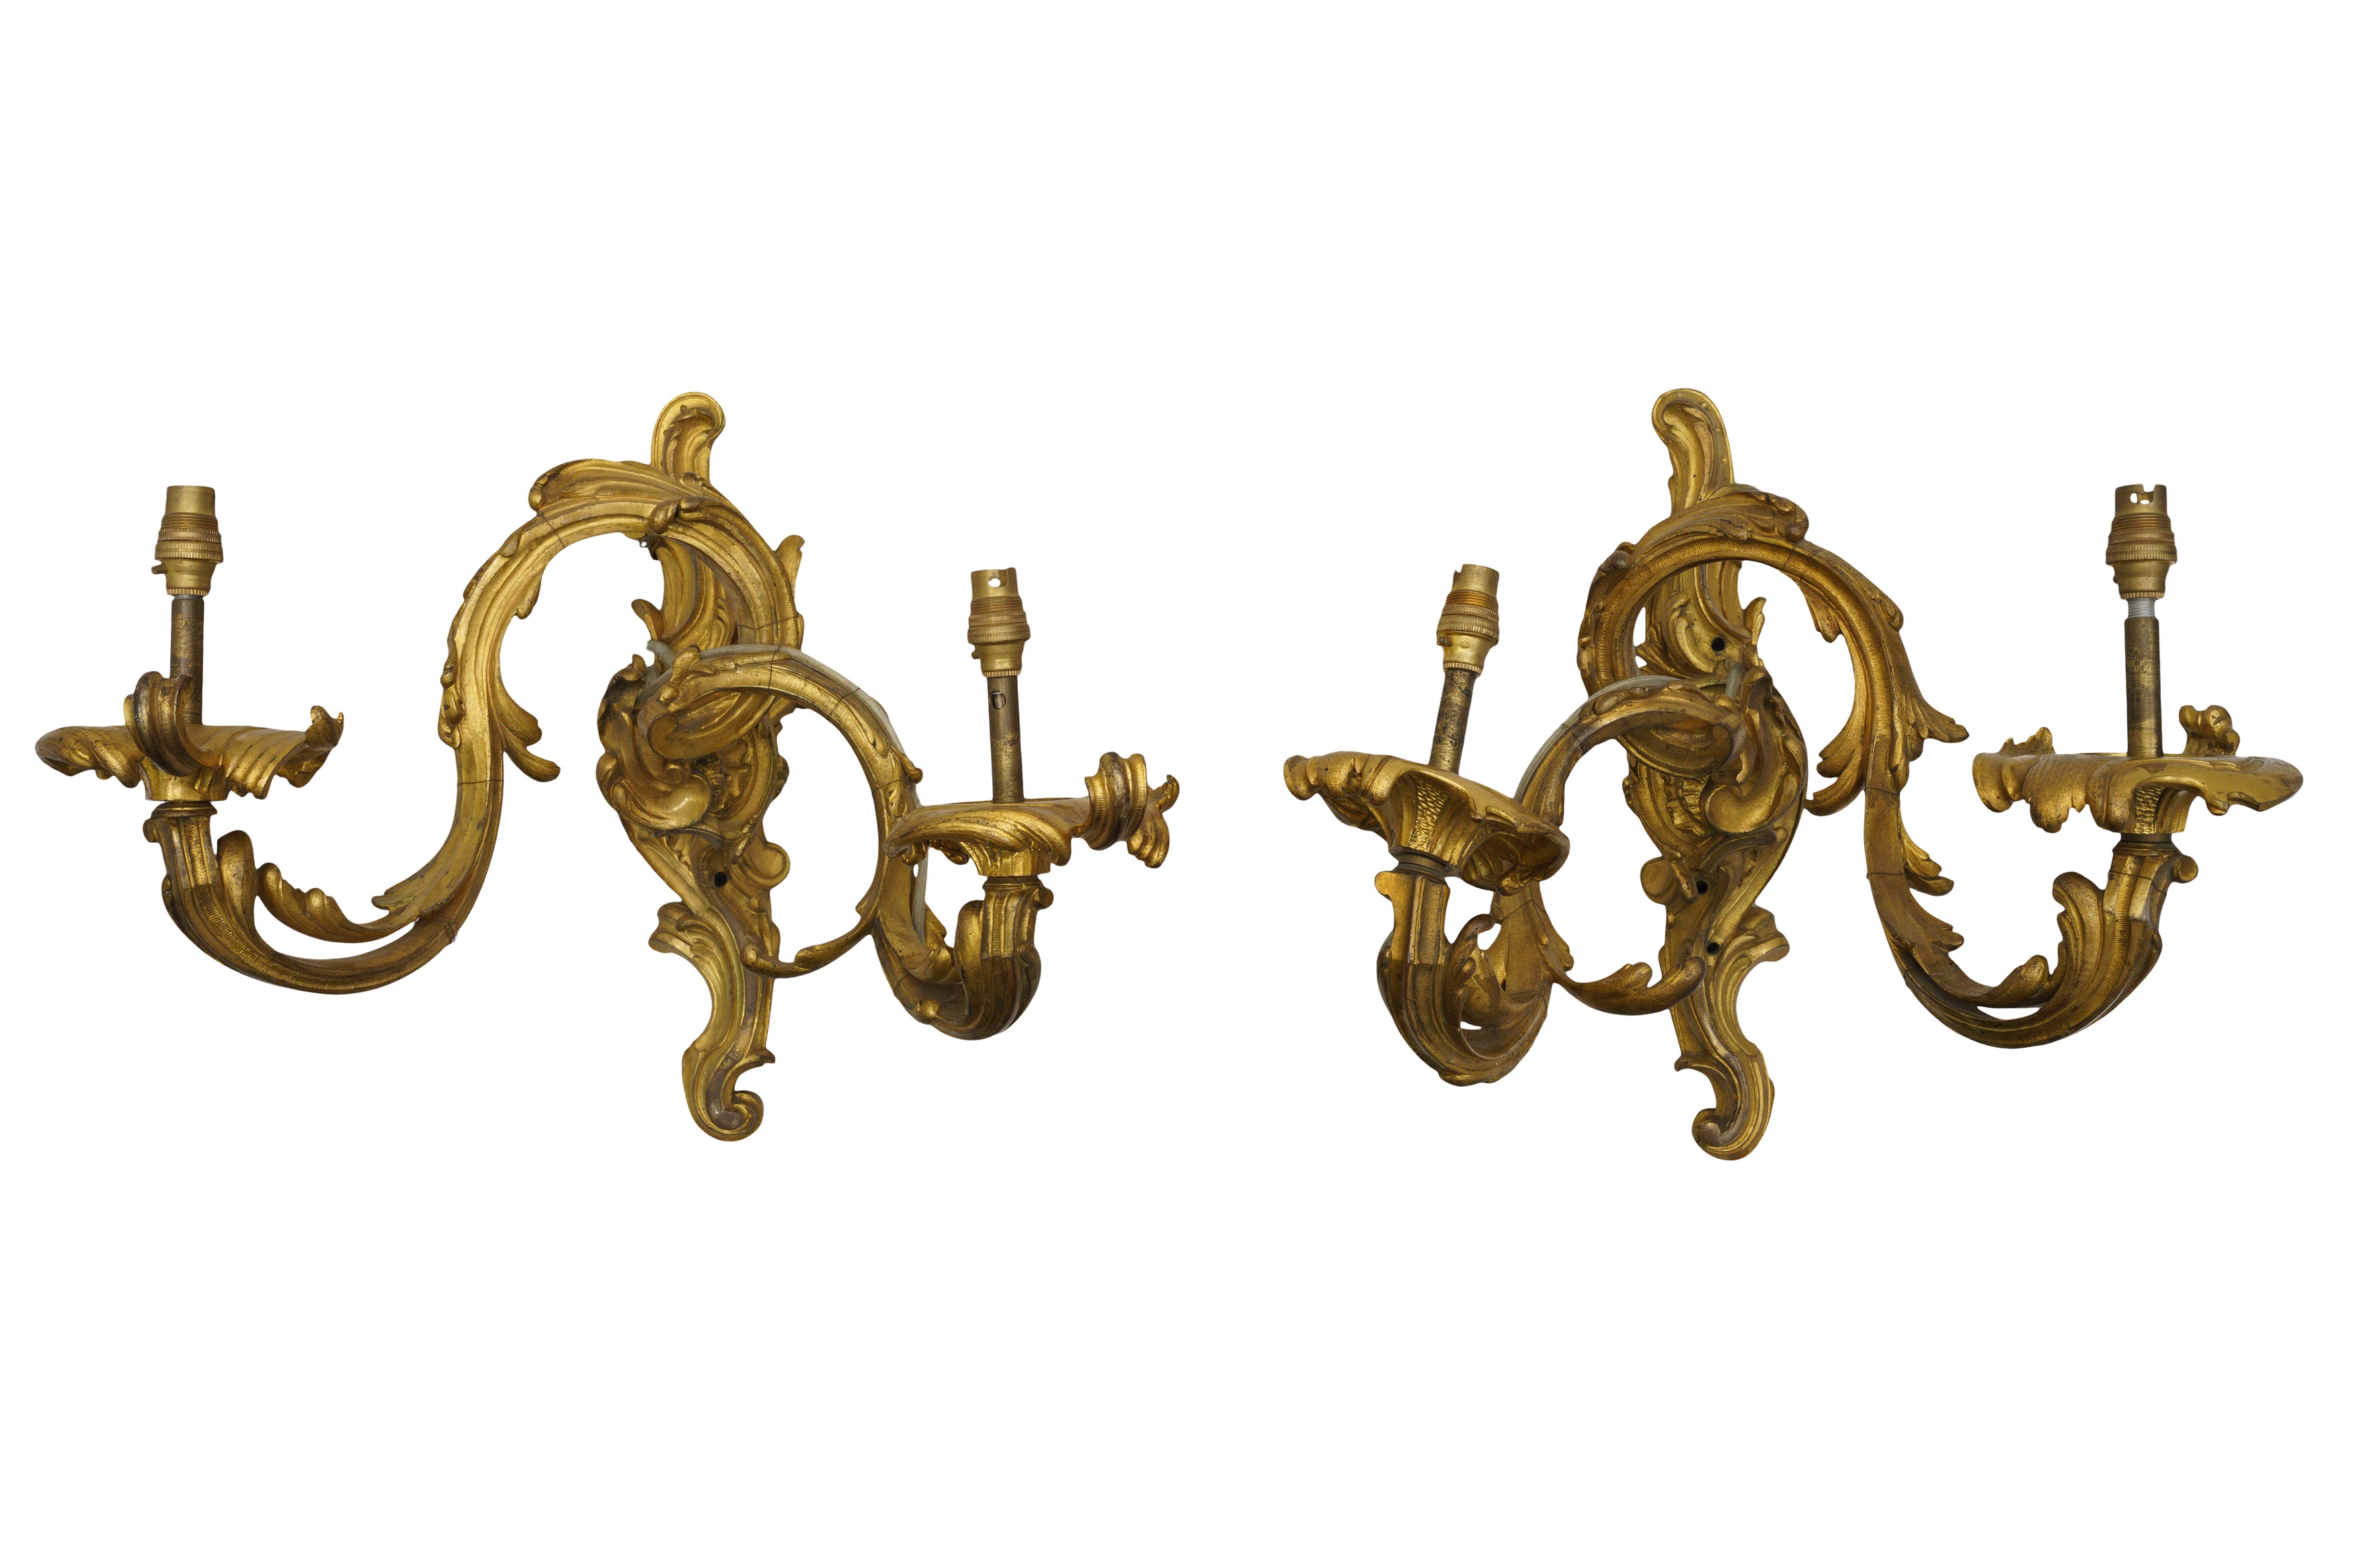 A PAIR OF GILT BRONZE ORMOLU TWIN BRANCH WALL SCONCES IN THE ROCOCO MANNER - Image 2 of 5